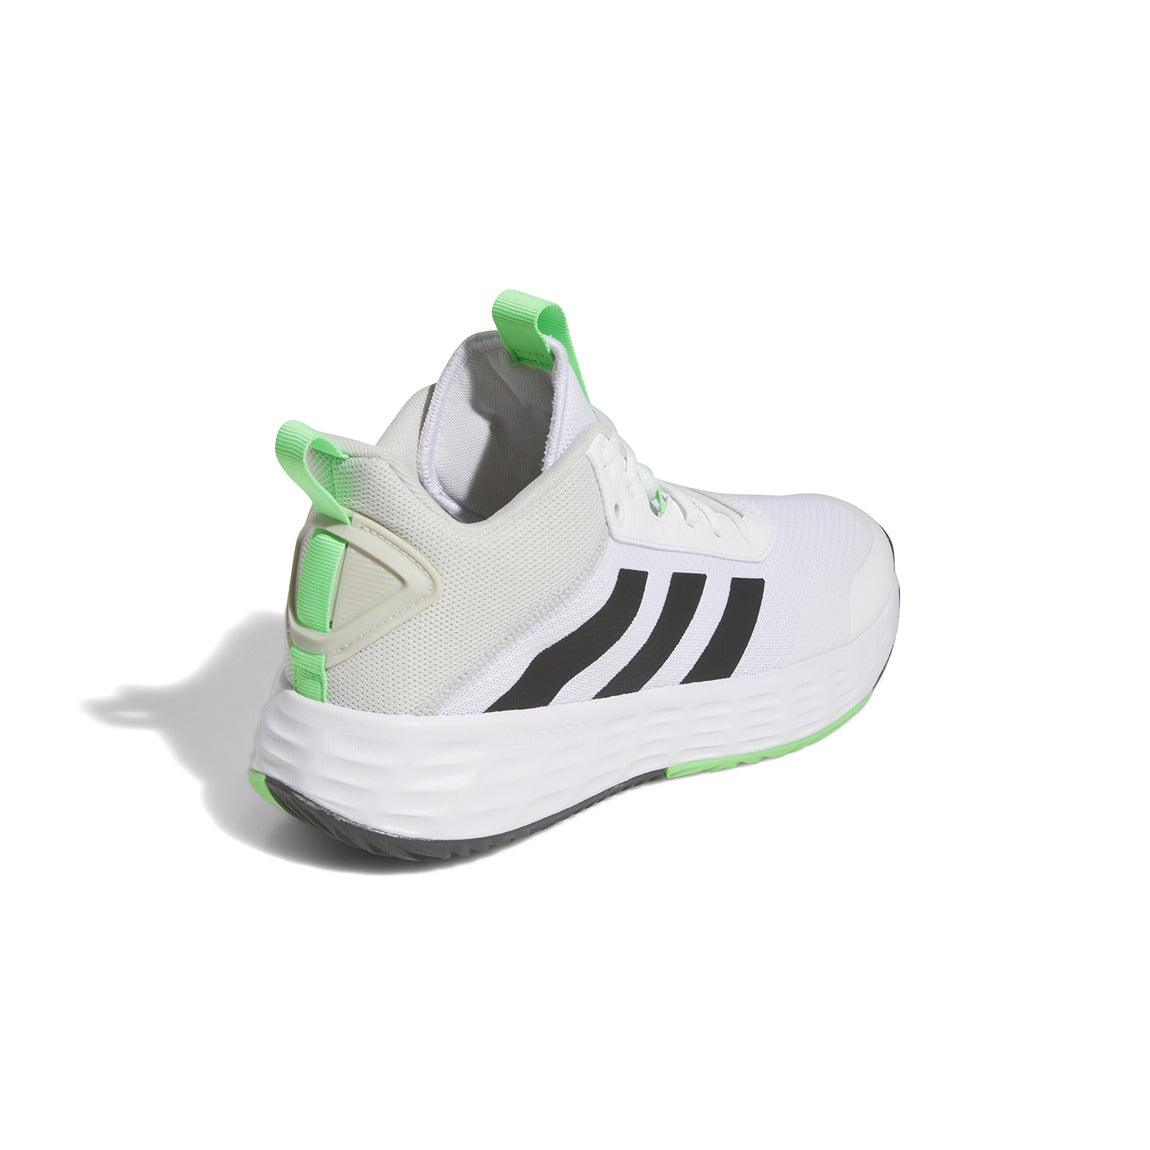 adidas OWN THE GAME 2.0 Basketball Shoes - Men